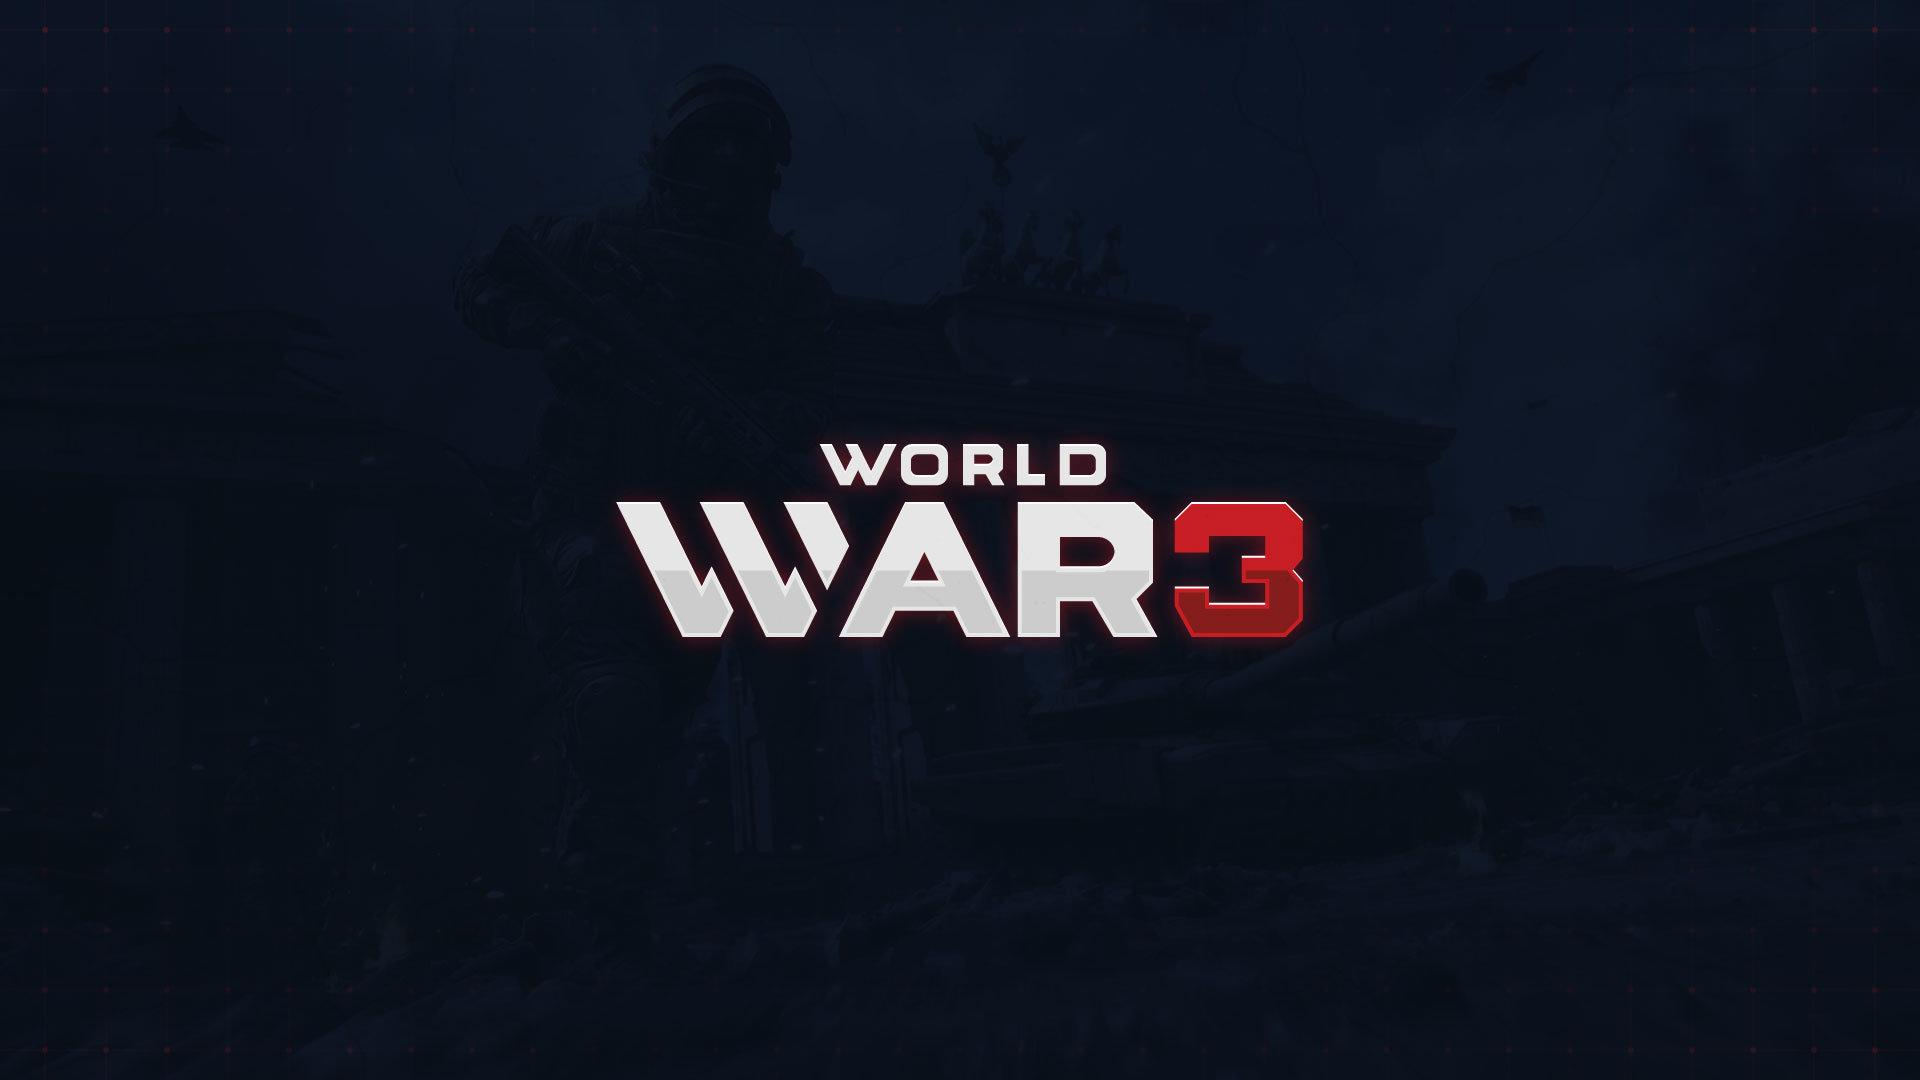 Some simple WW3 Wallpaper Creations and Tutorials